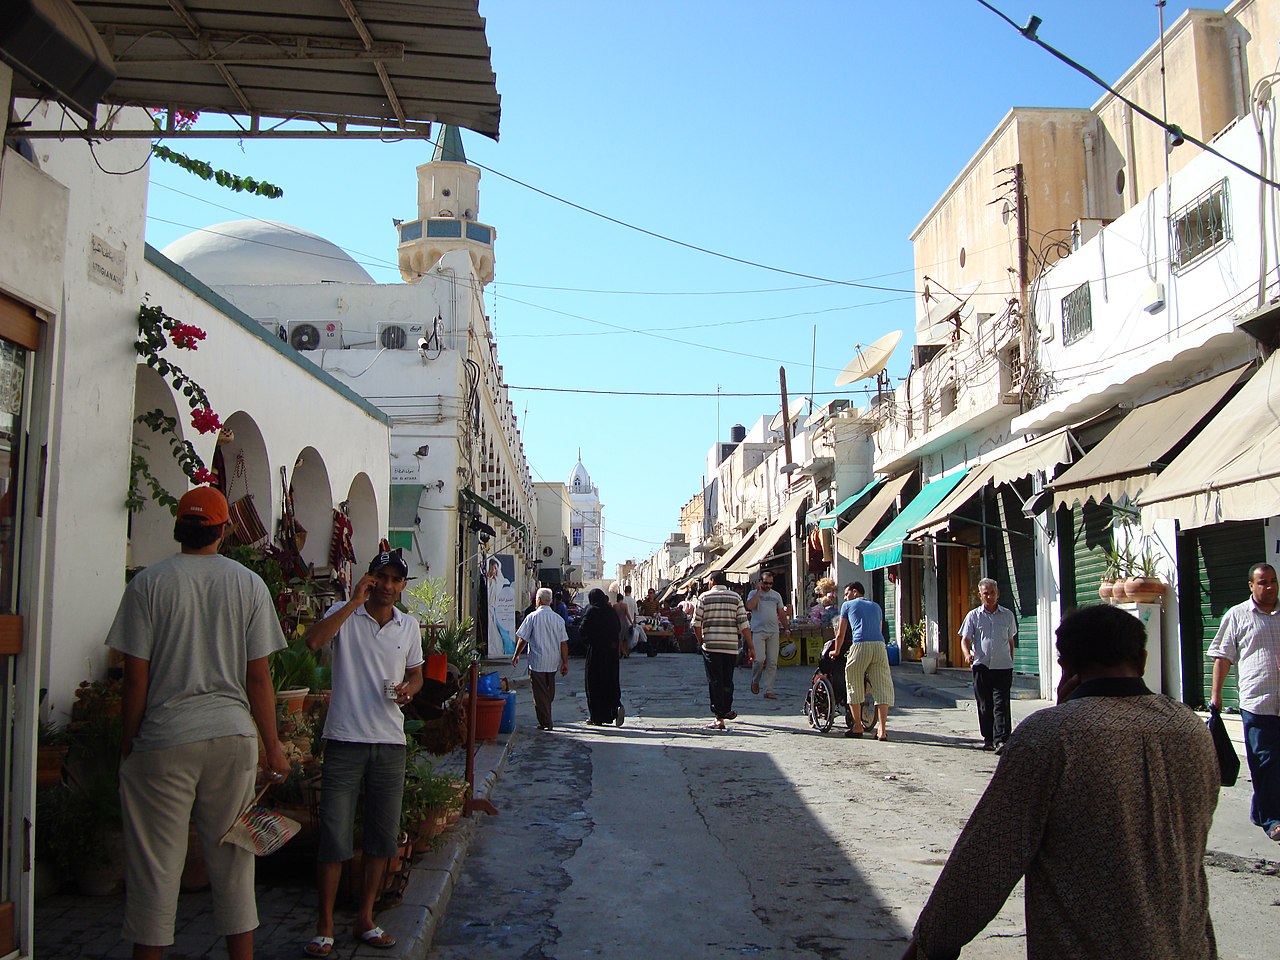 <p>Northward view down the street with the dome and minaret visible on the left</p>